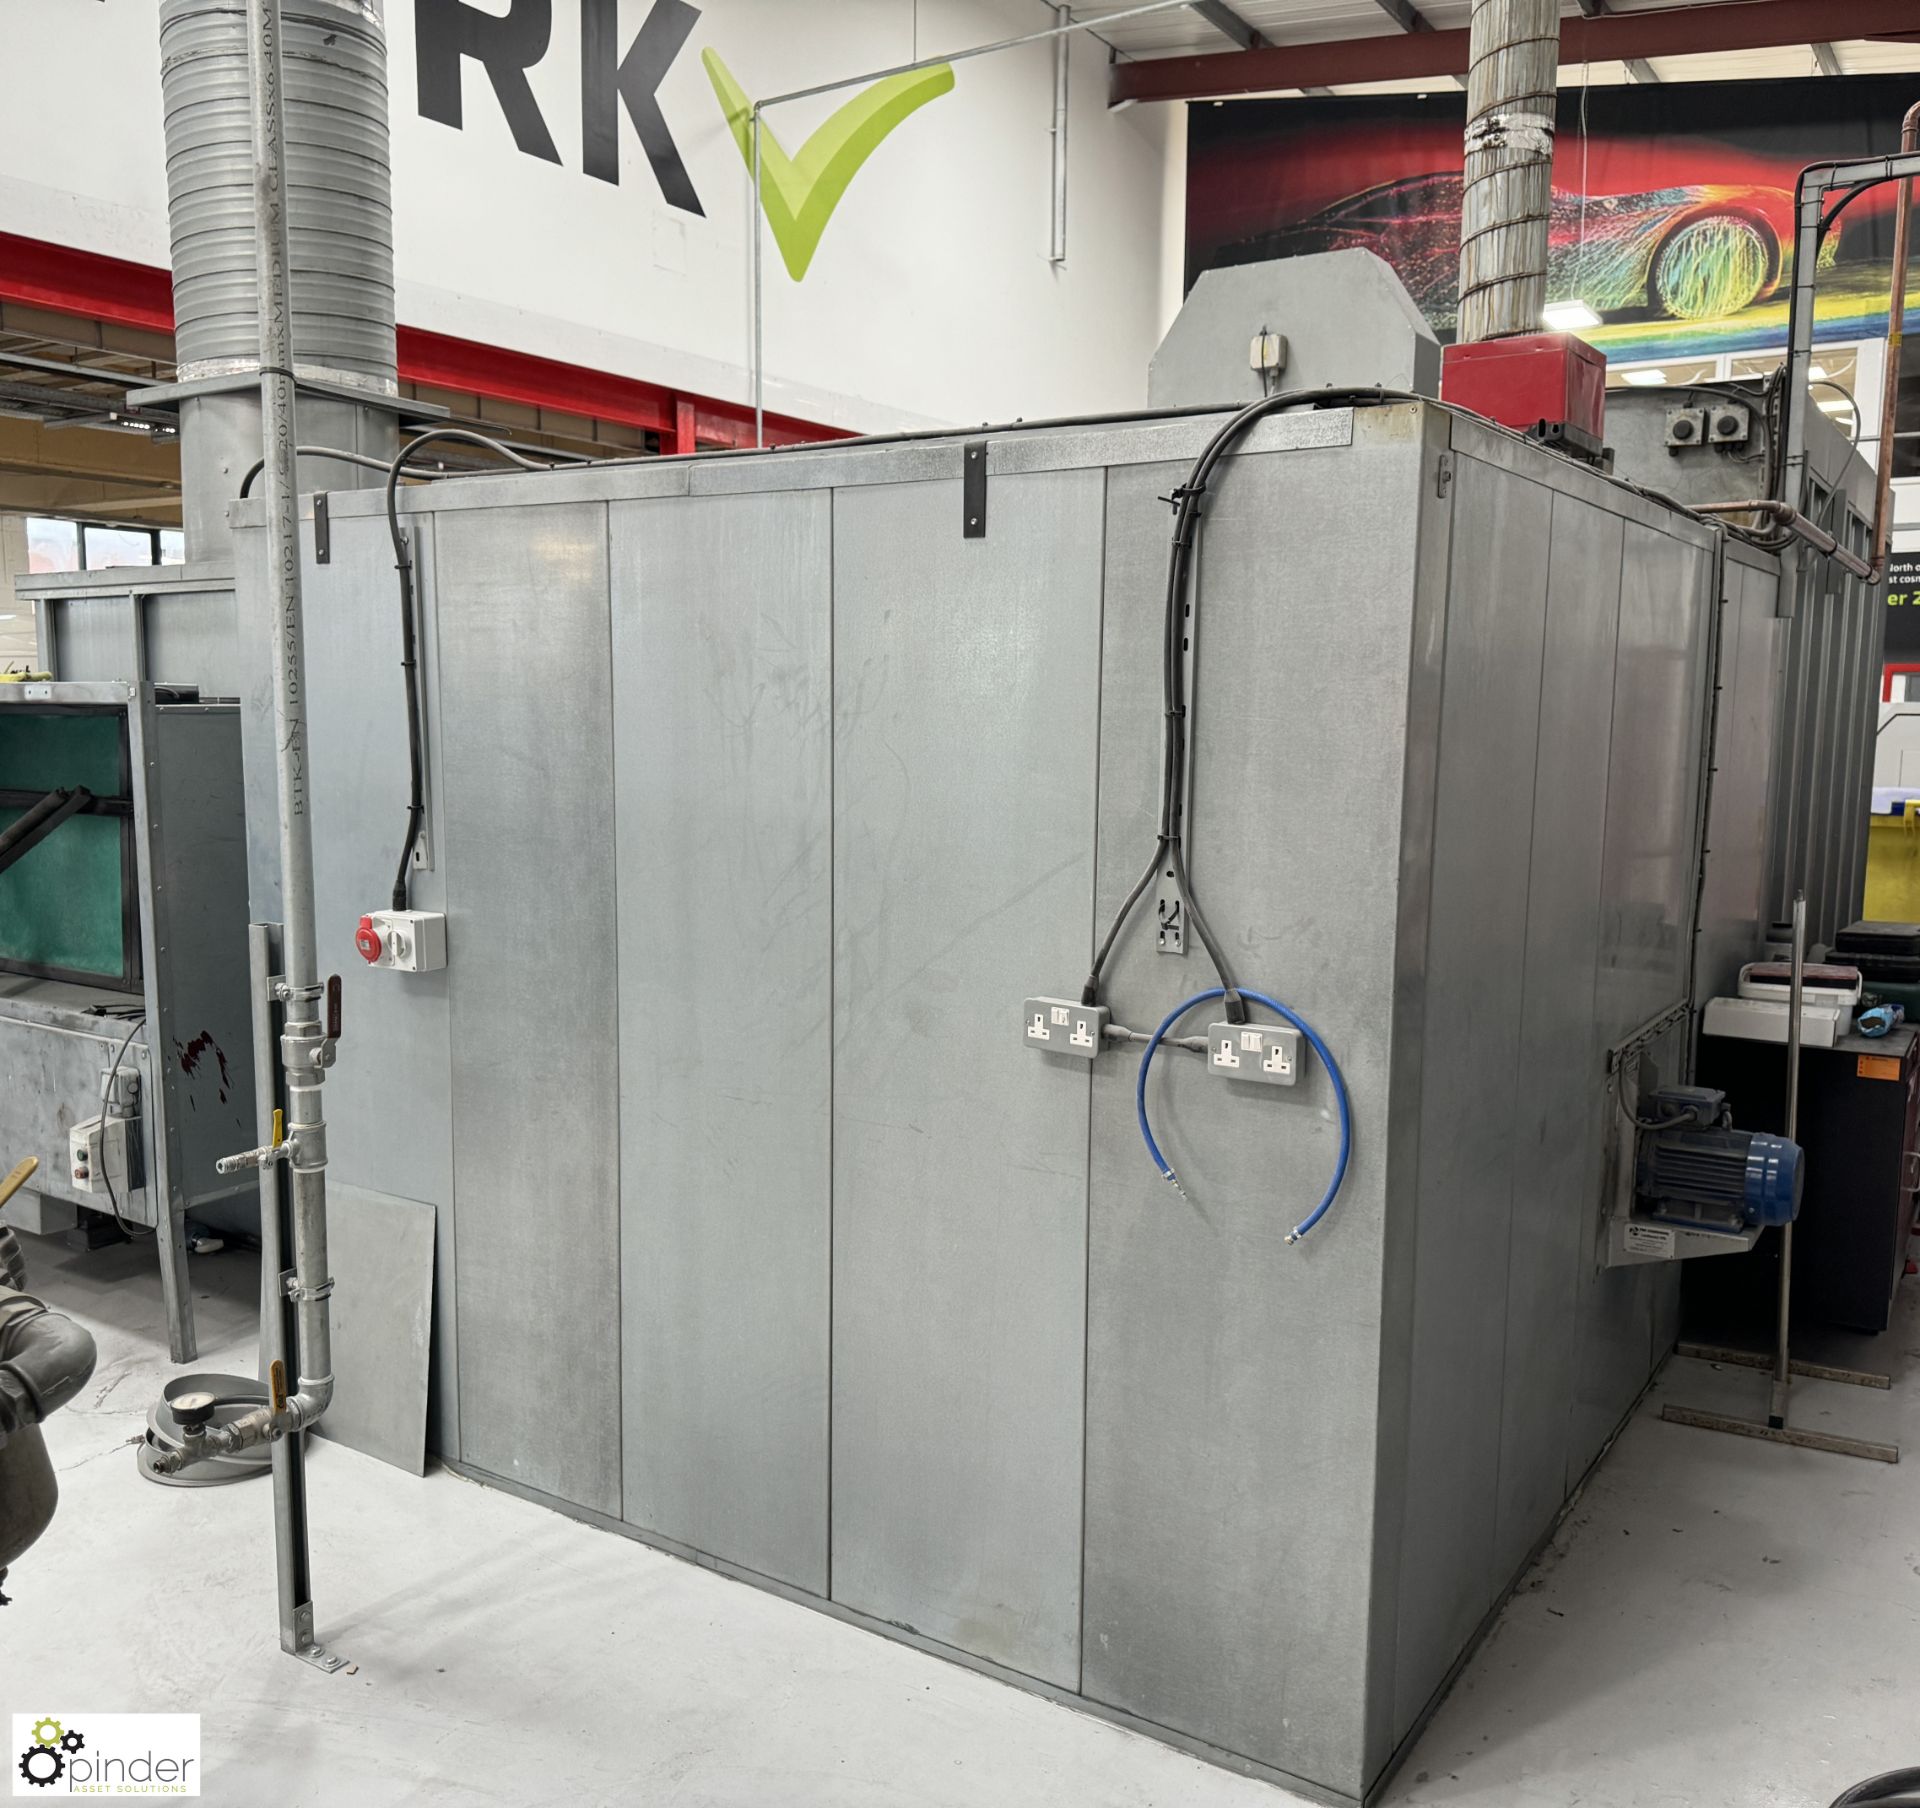 Greenair galvanised combined Wheel Spray Booth and gas fired Curing Oven, spray booth 1800mm x 900mm - Image 6 of 18